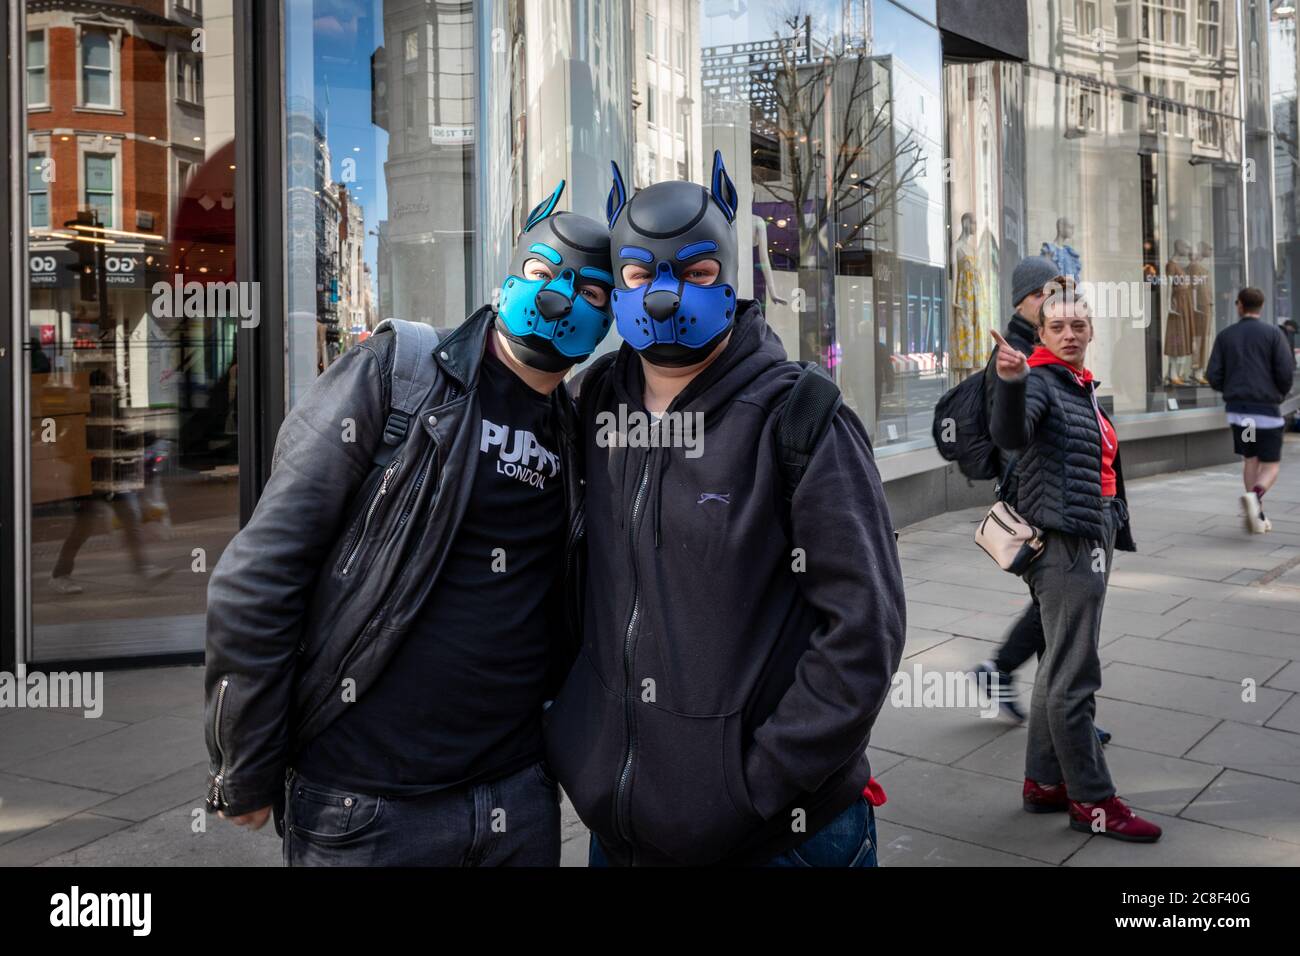 London - England - 21032020 - Couple wearing dog style facemasks during the Covid-19 restrictions in London - Photographer : Brian Duffy Stock Photo